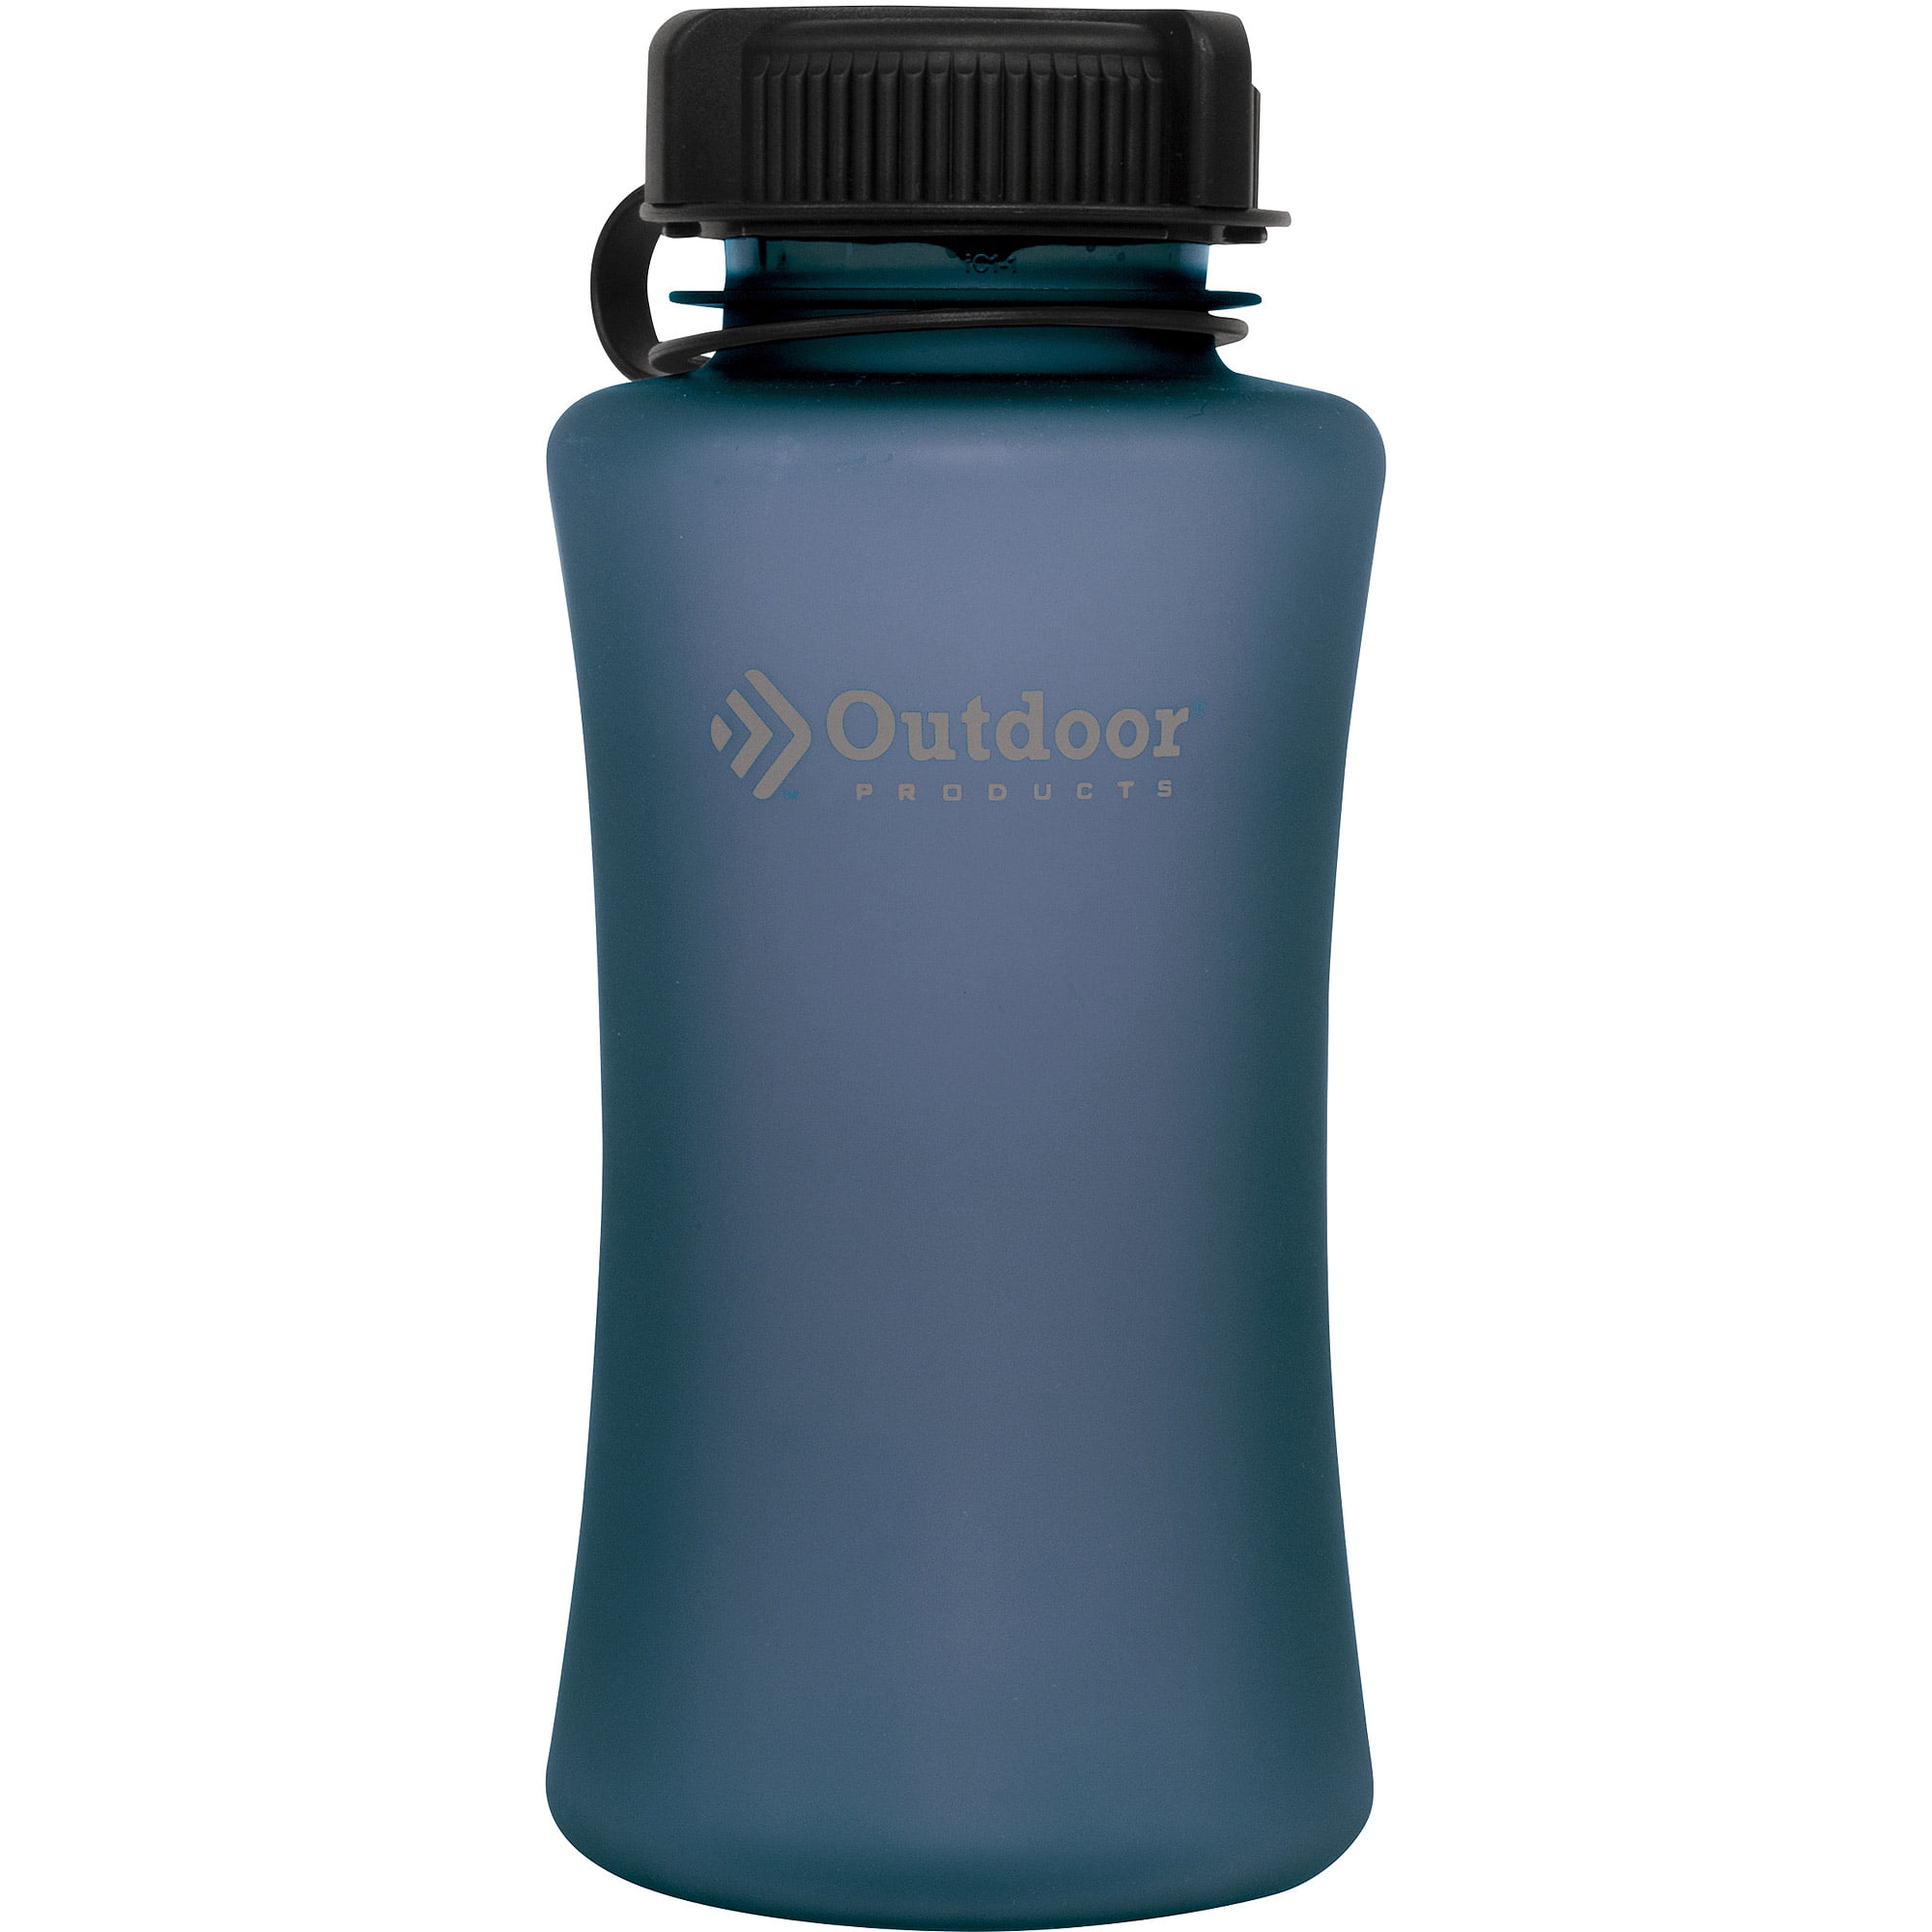 The Better Home Sipper Water Bottle For Adults 1 Litre